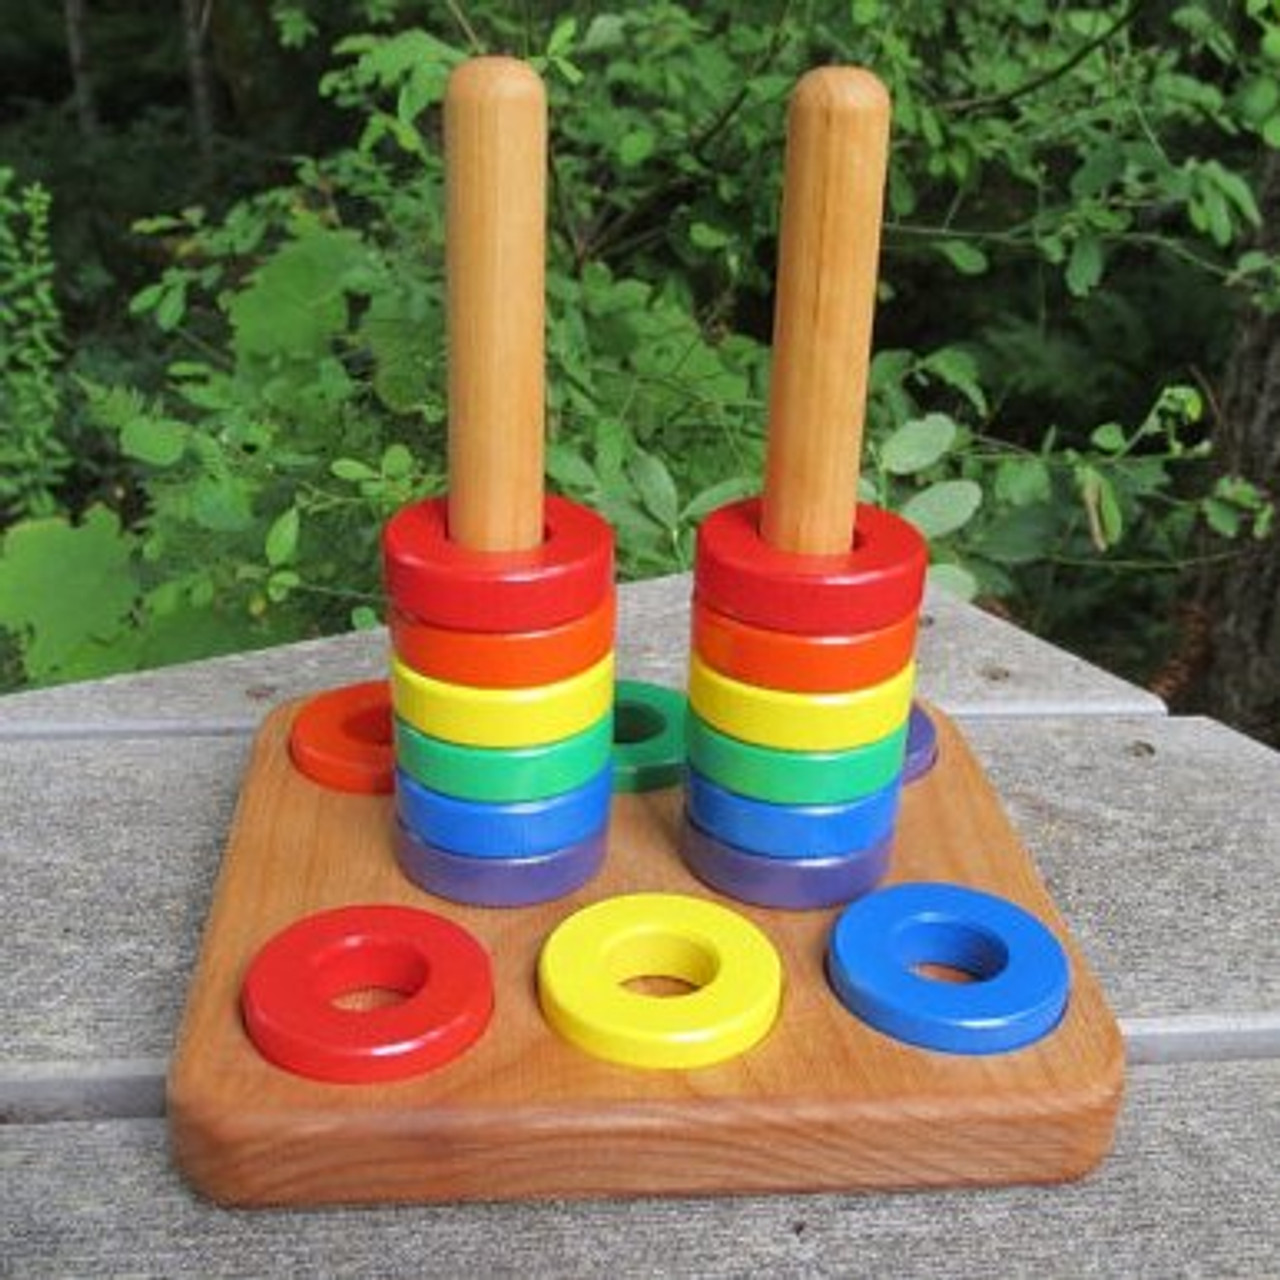 Wooden Stacker Toy